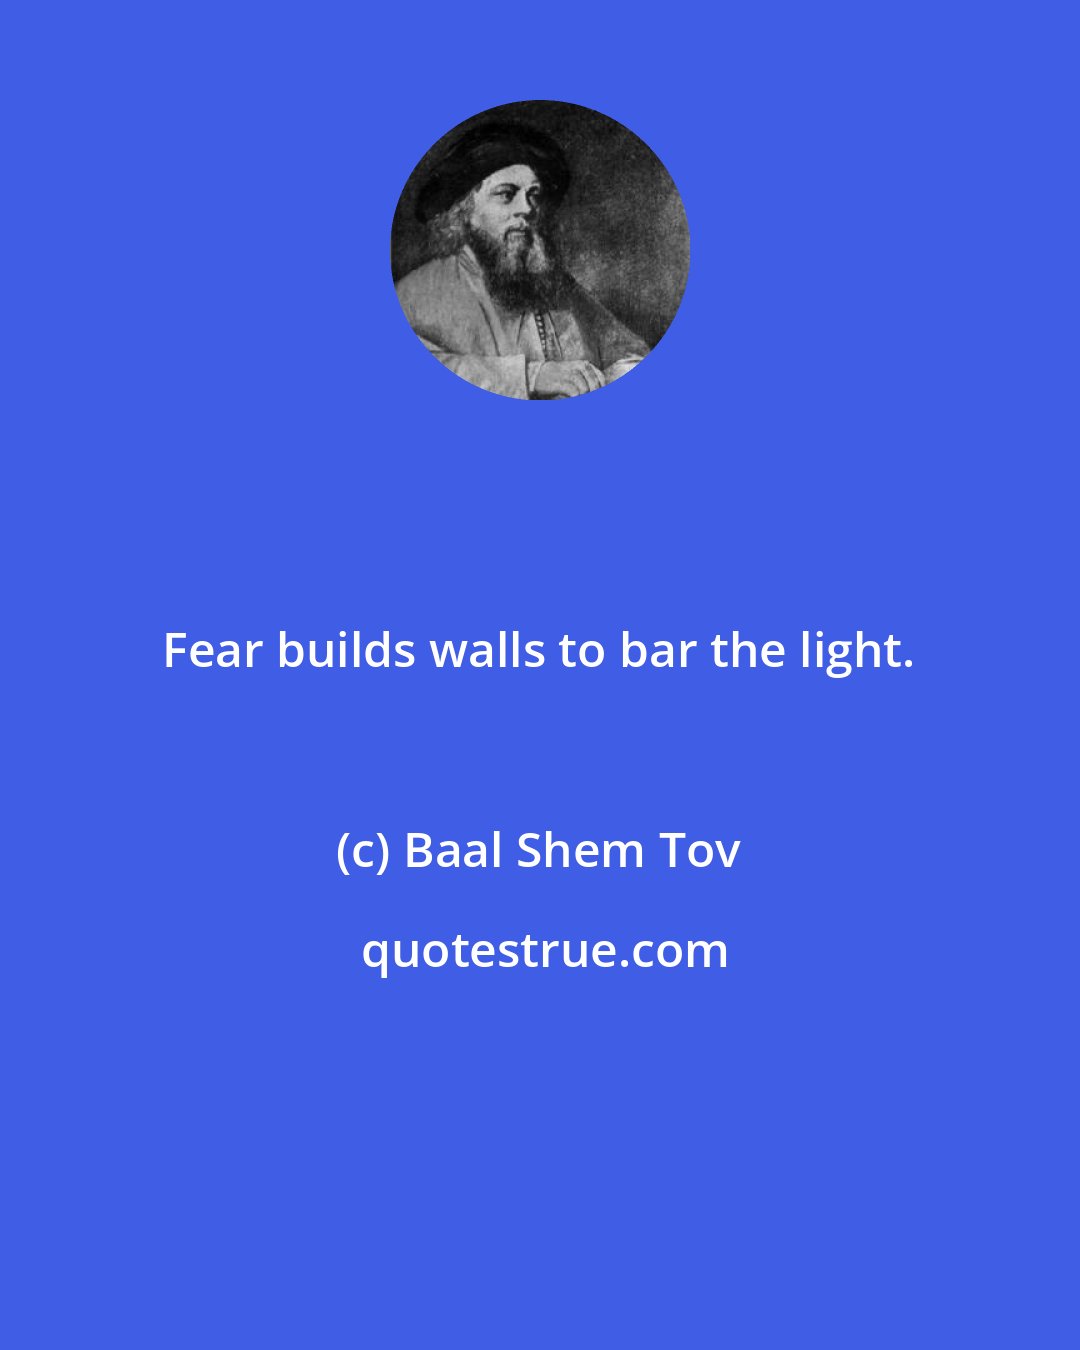 Baal Shem Tov: Fear builds walls to bar the light.